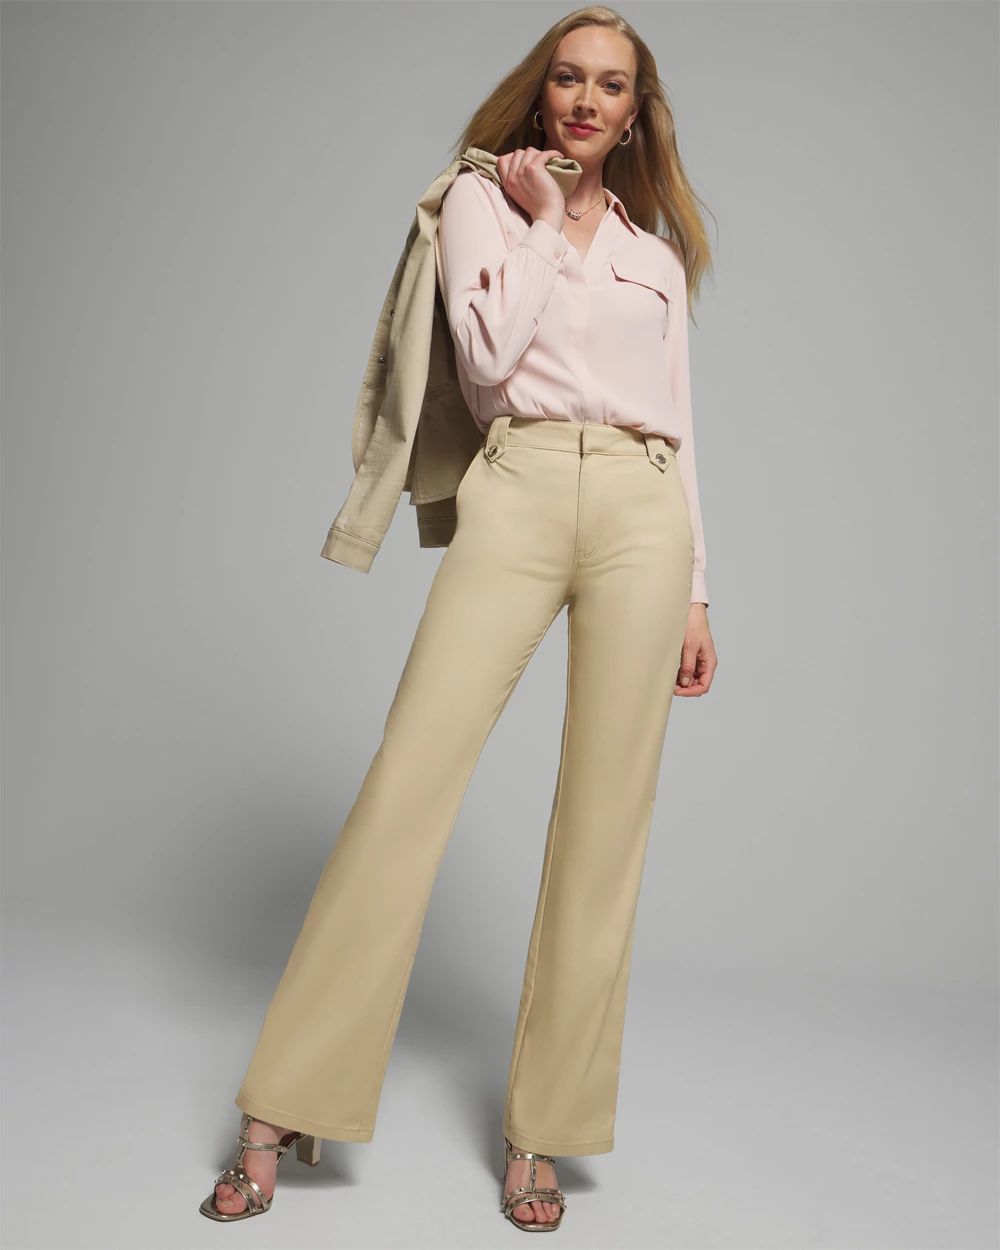 Outlet WHBM Extra High Rise Sateen Trousers click to view larger image.